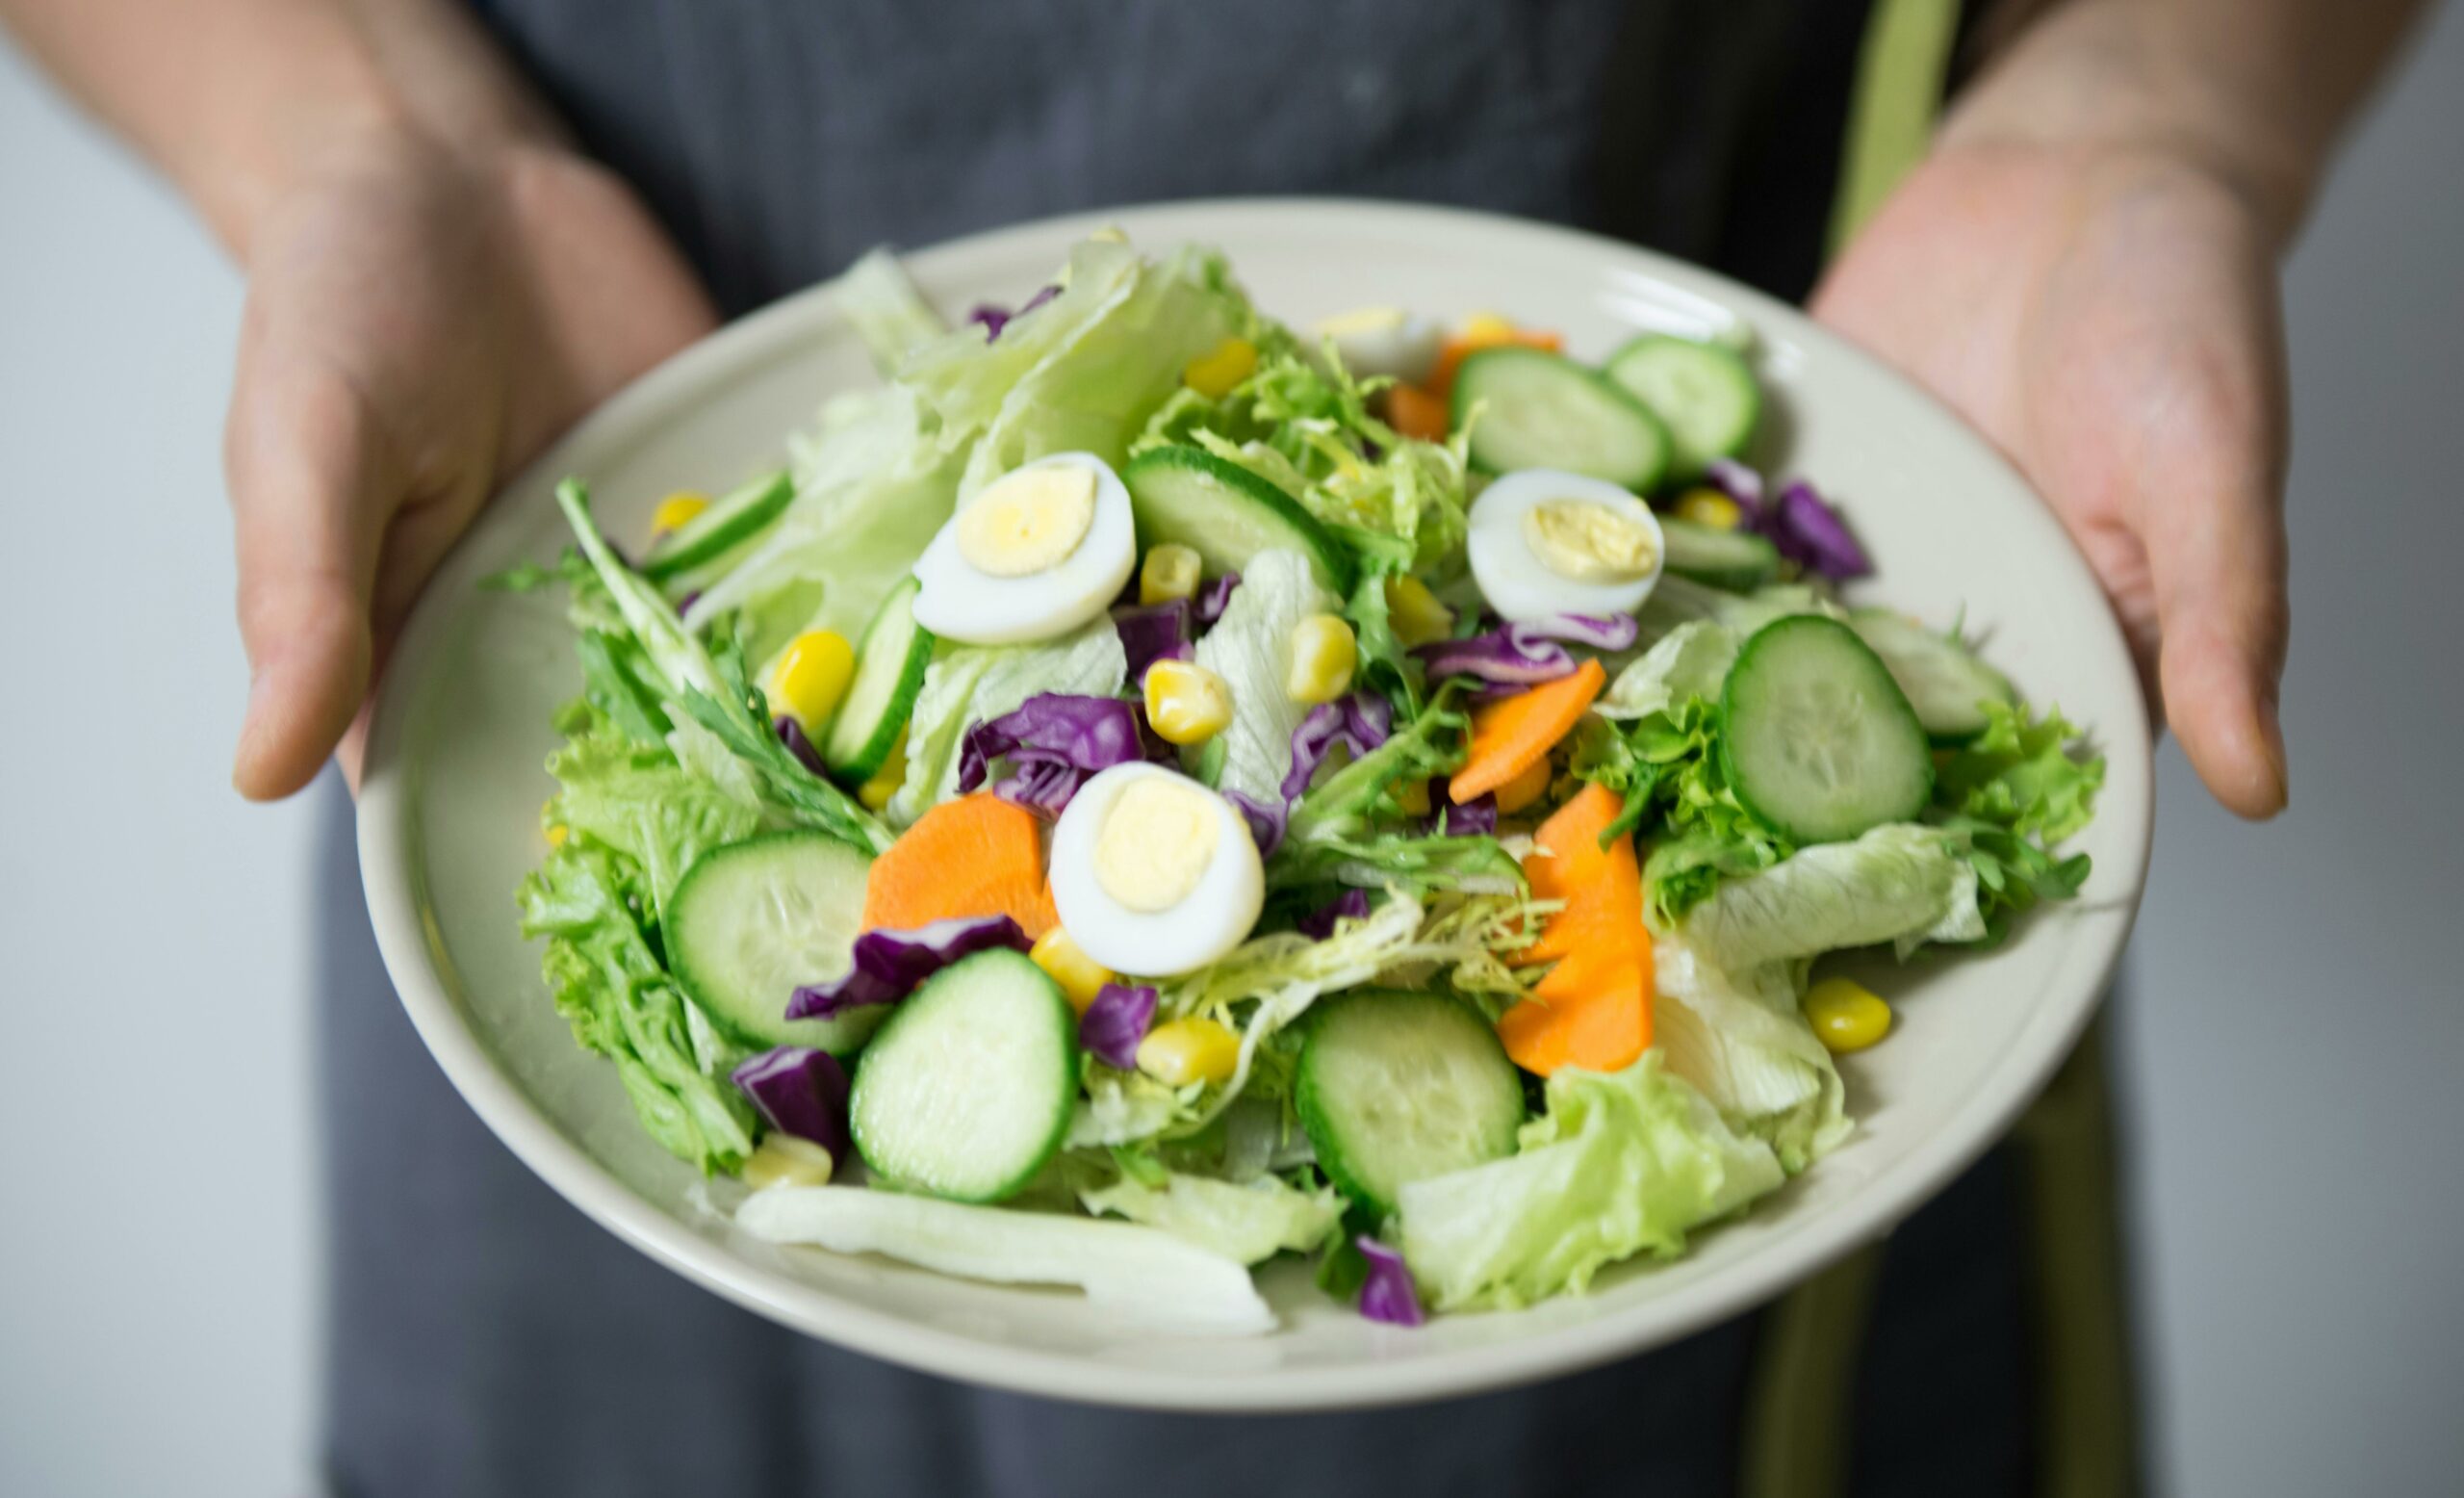 Top 4 Healthy Salads to Try This Winter